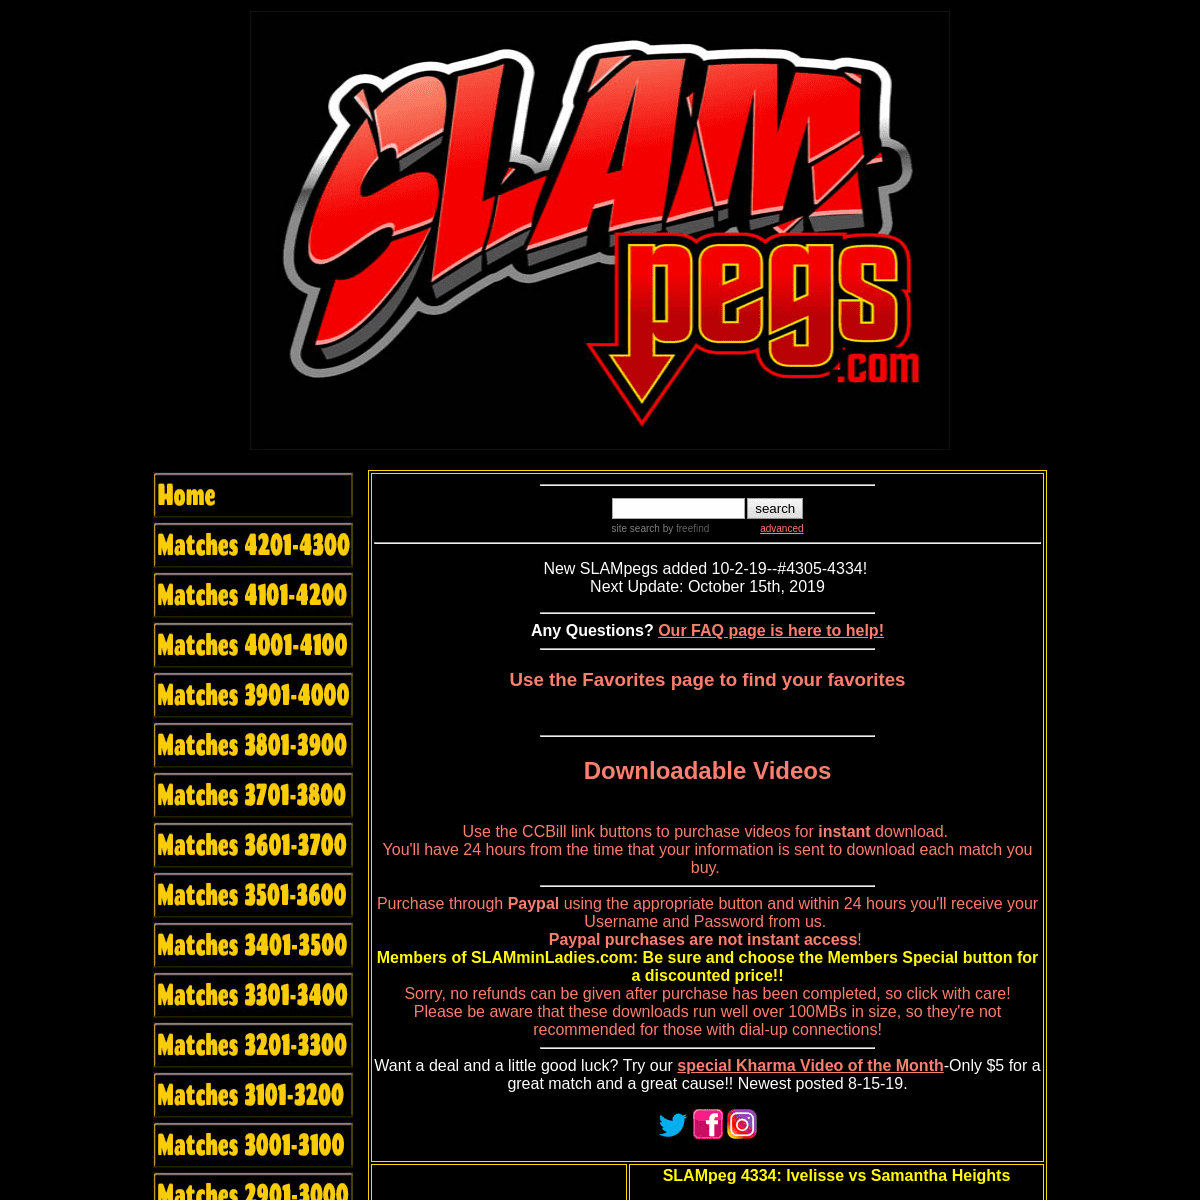 A complete backup of slampegs.com